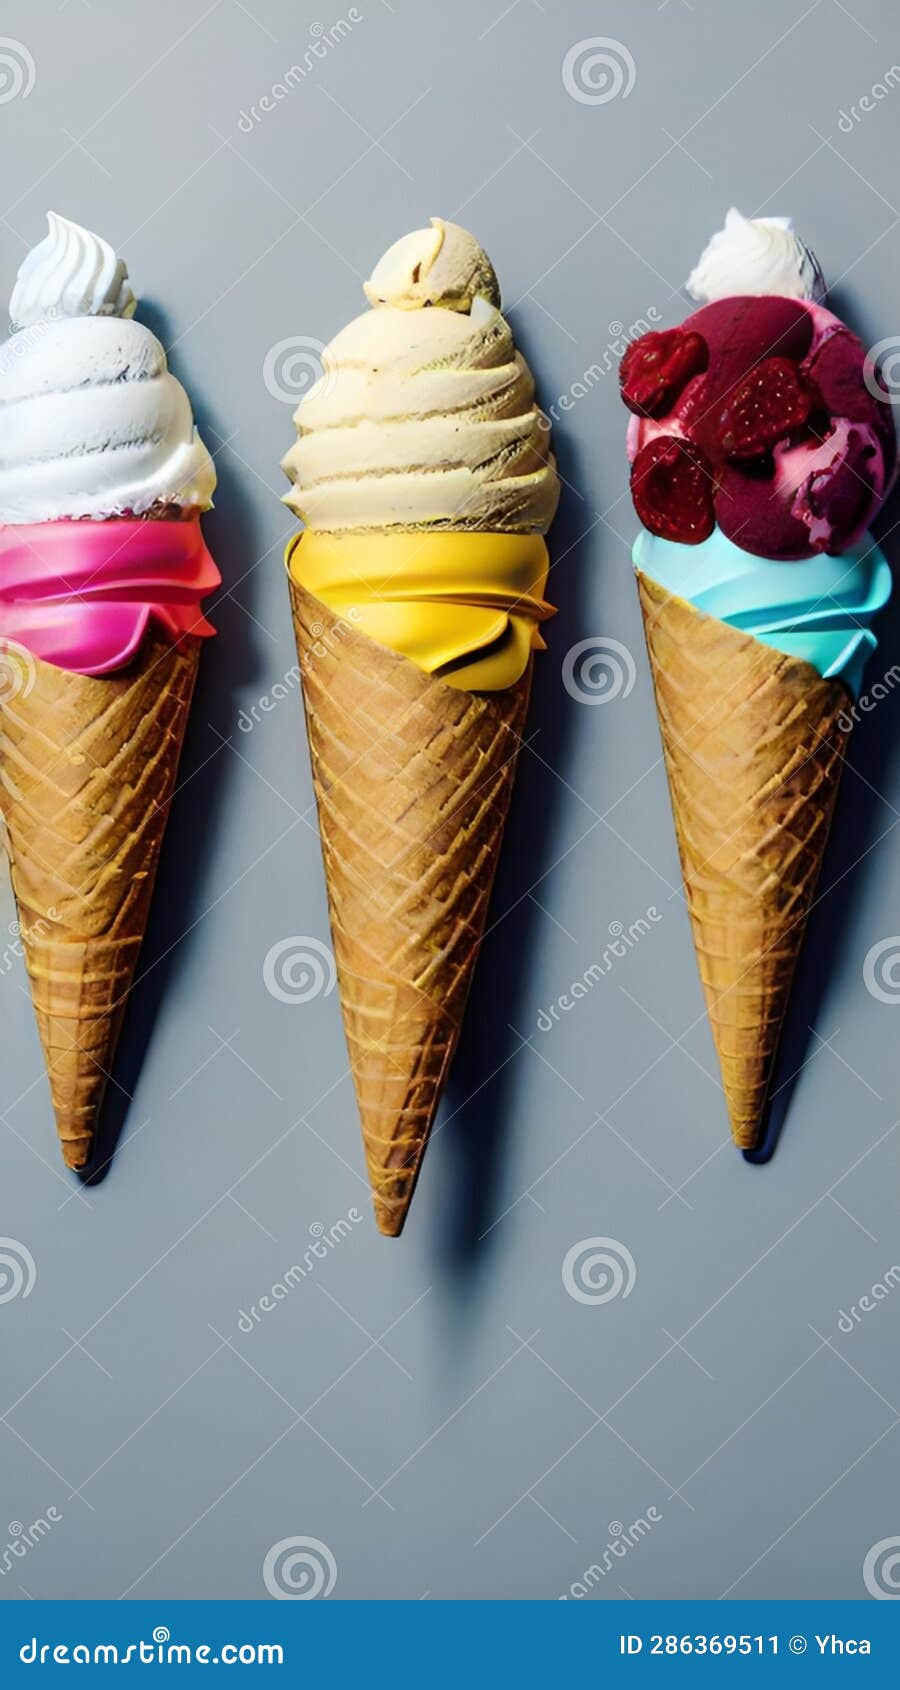 Ice Cream Cones with Different Flavors and Toppings on a White ...